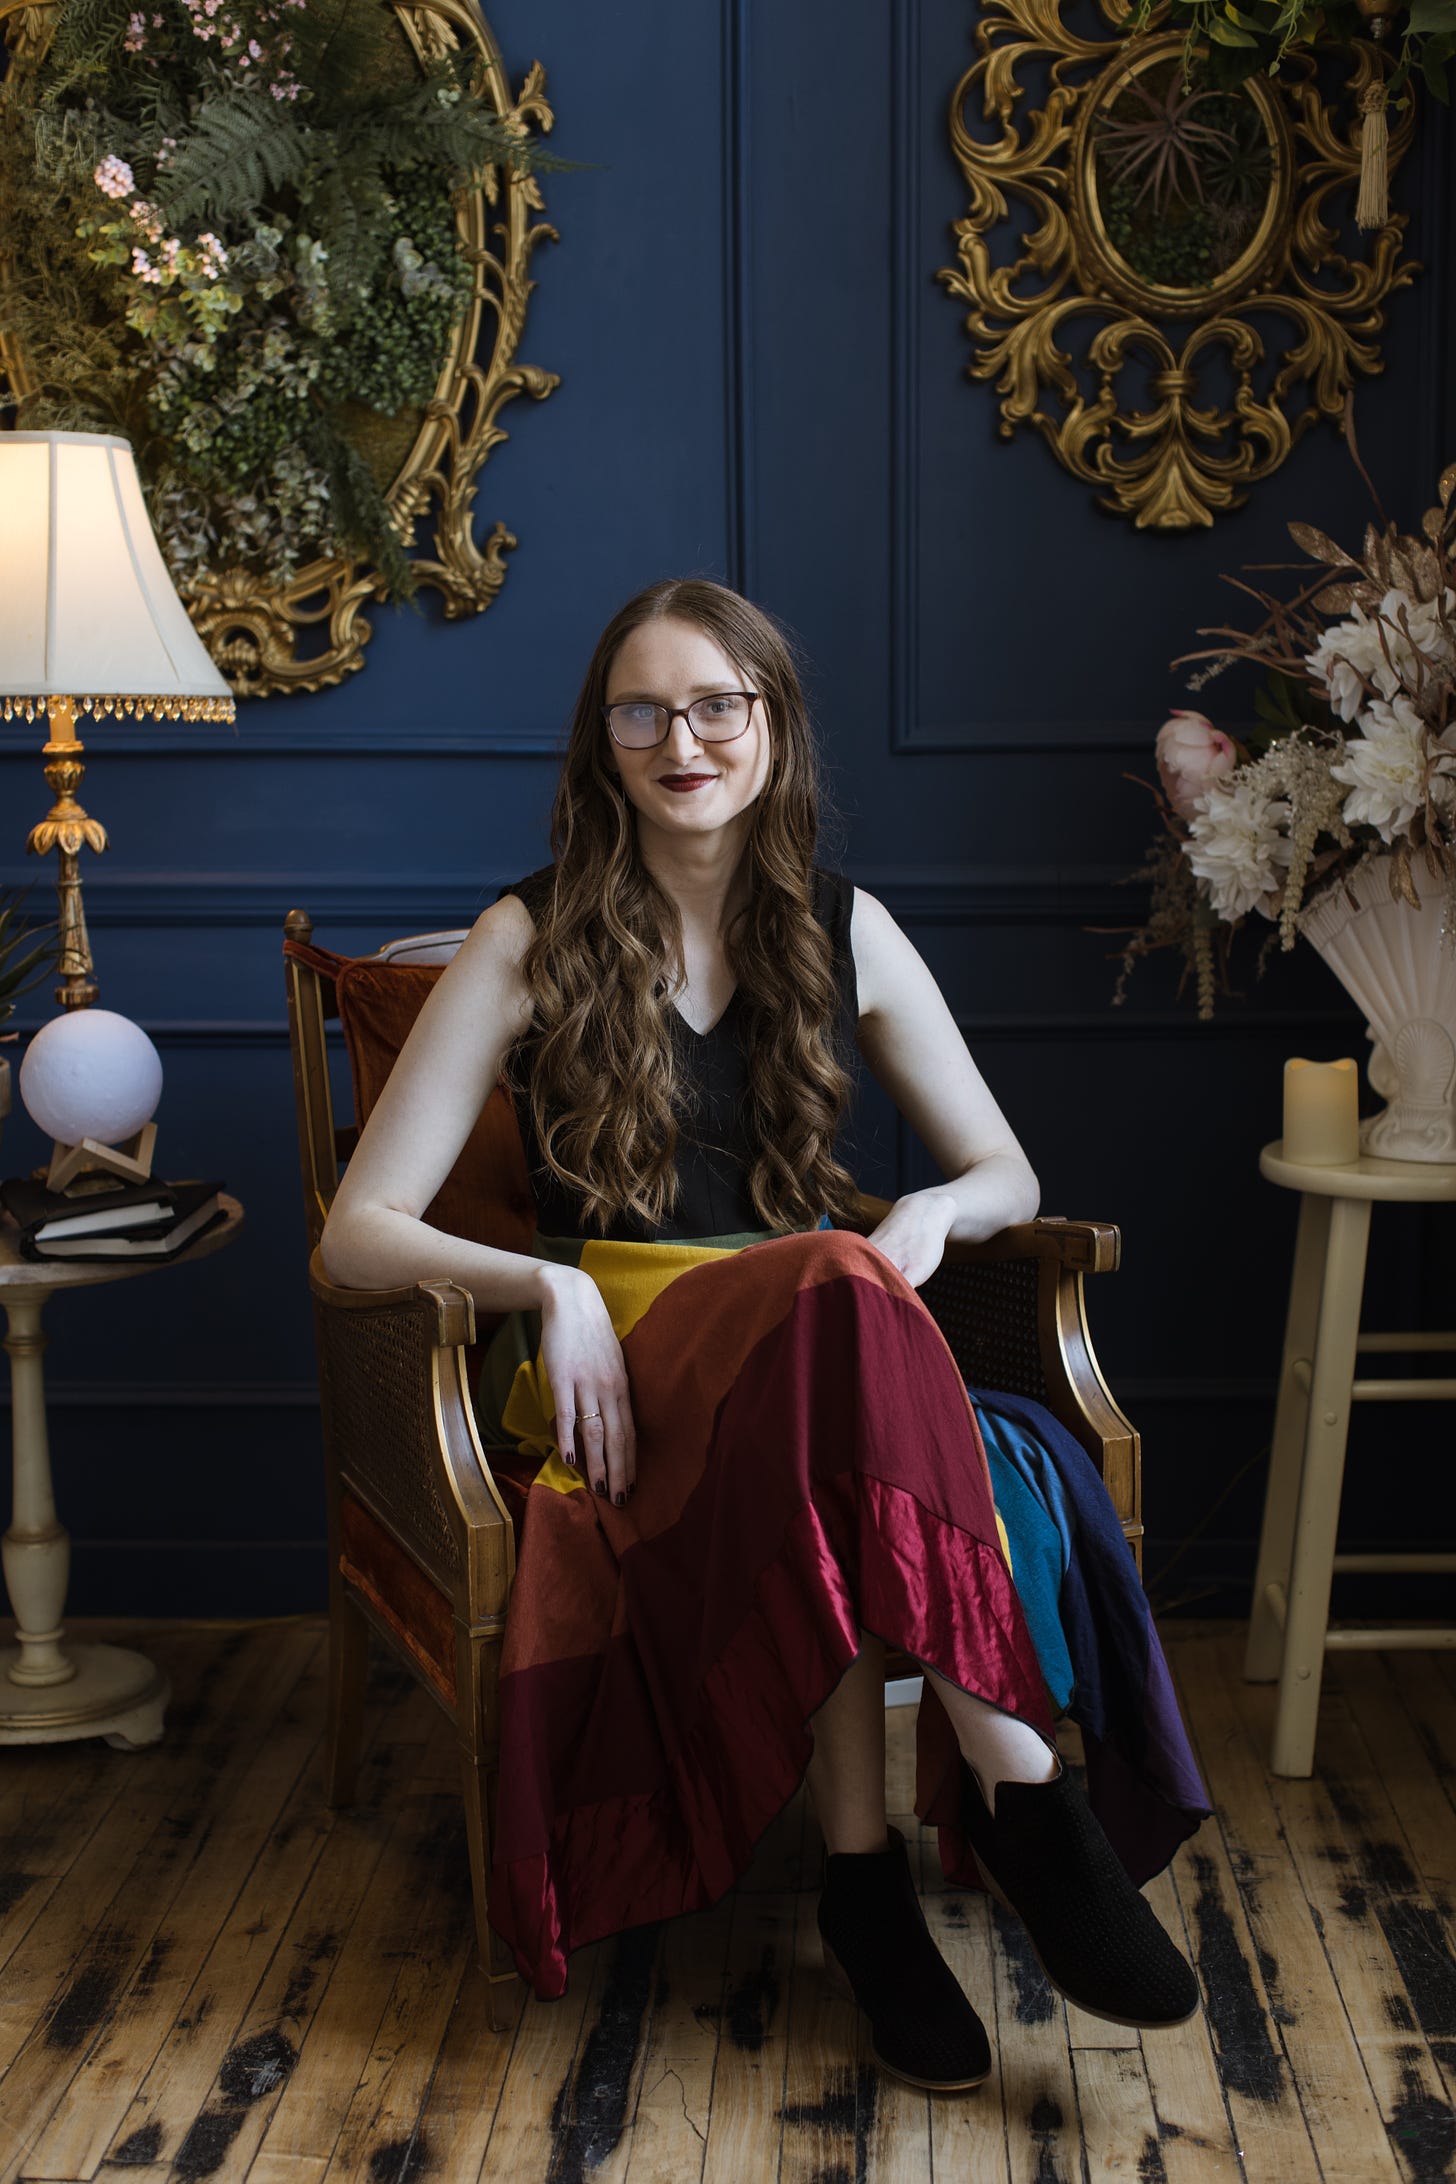 Kandi Zeller (she/her), a white woman with glasses and long reddish brown hair, sits in a burnt orange vintage chair. Kandi is wearing a rainbow dress, a dramatic red lip, and black boots. Behind her is a blue wall with two gigantic gold frames, overflowing with 3D green foliage. Next to her are two side tables. One has a stack of books and a mini moon lamp. The other has a battery-operated candle and some silk flowers.